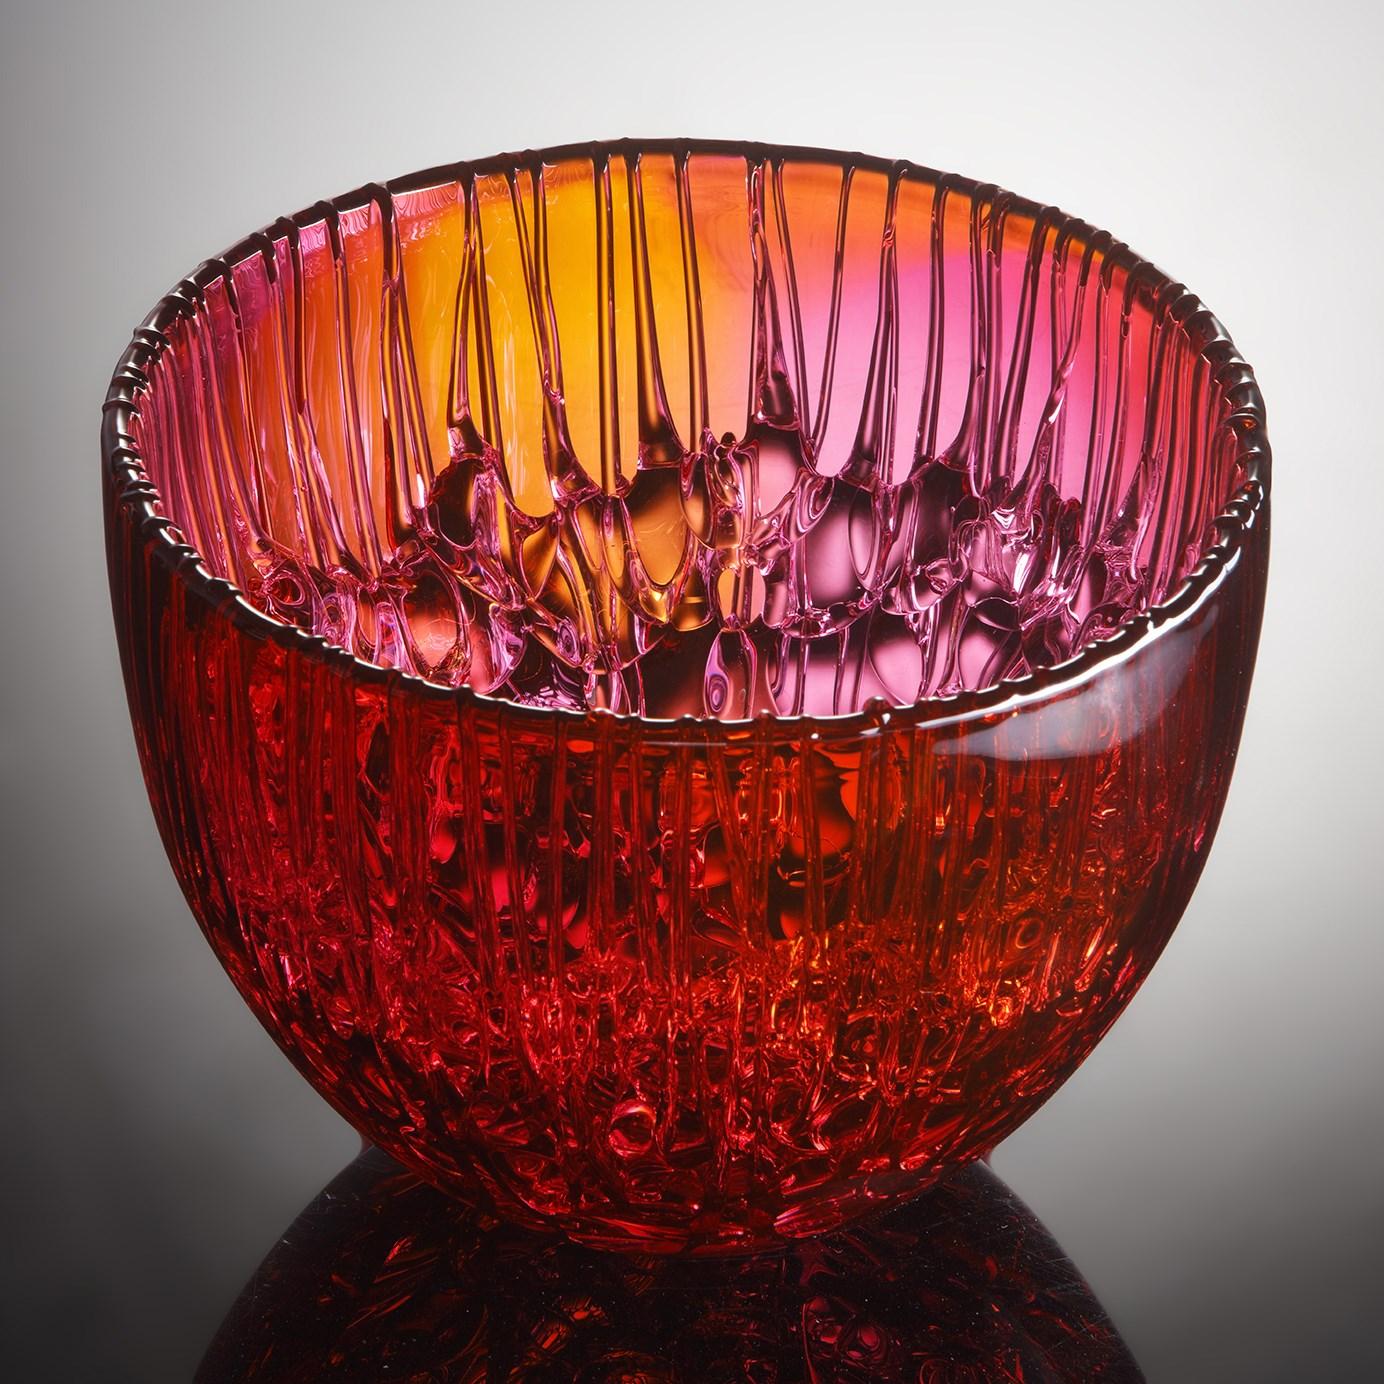 Cassito in Fuchsia & Gold, a Glass Bowl & Centrepiece by Katherine Huskie 4